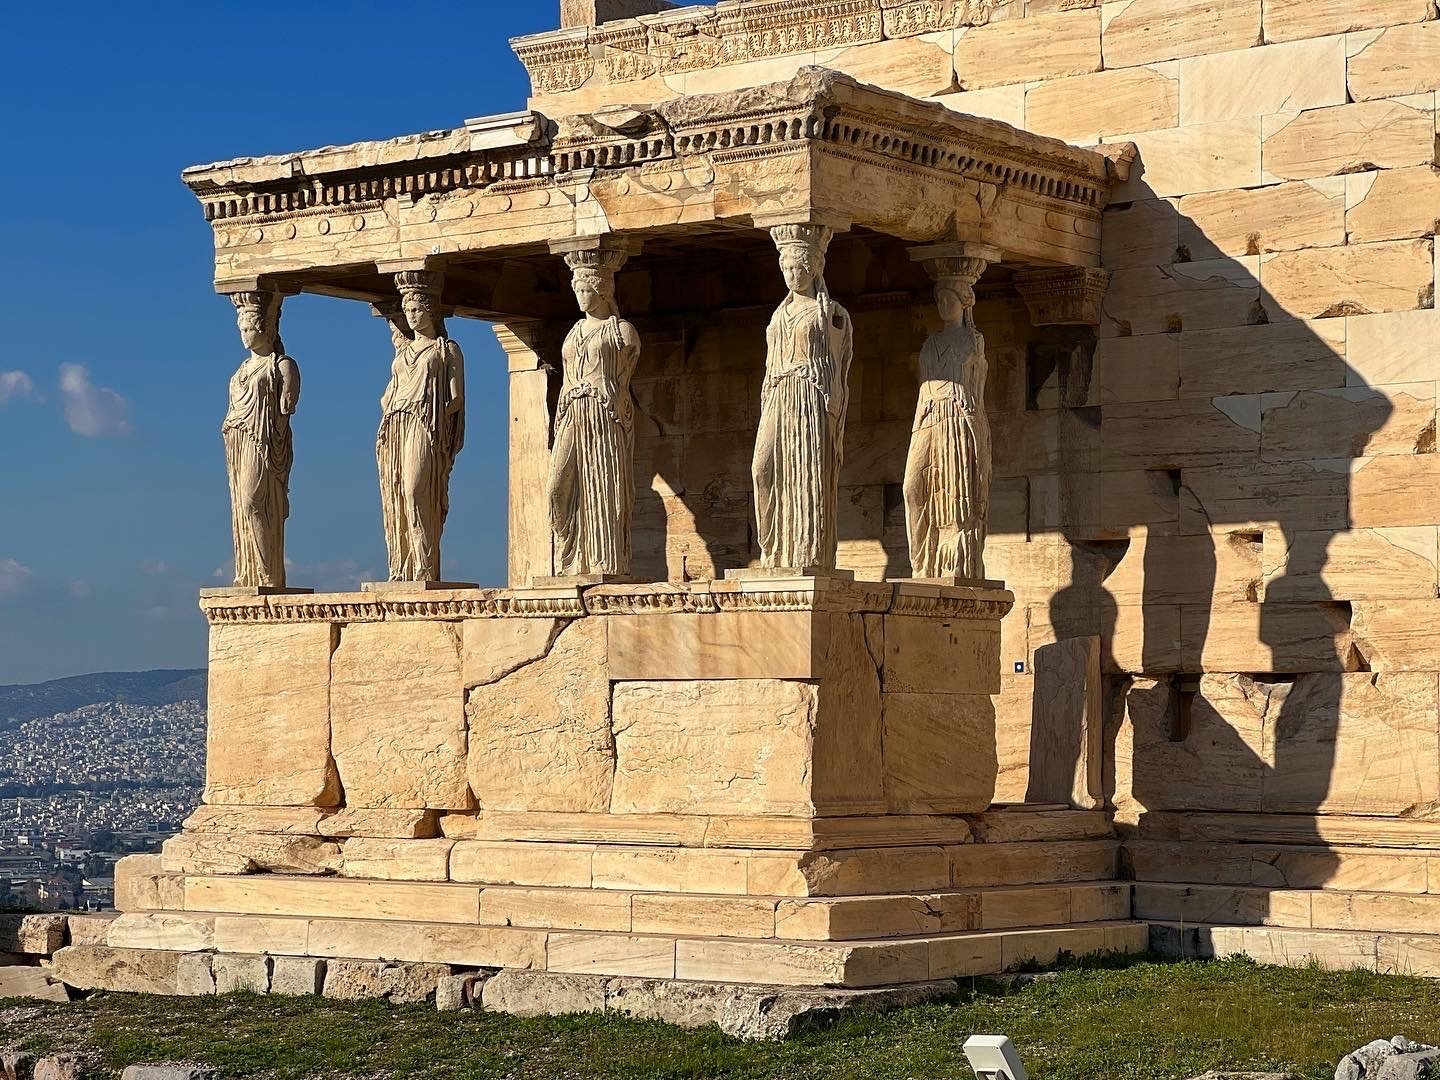 3+Days+in+Athens+visit+Athens+in+3+days+The+Caryatid+Porch+on+the+Acropolis%2C+Athens%2C+Greece.+